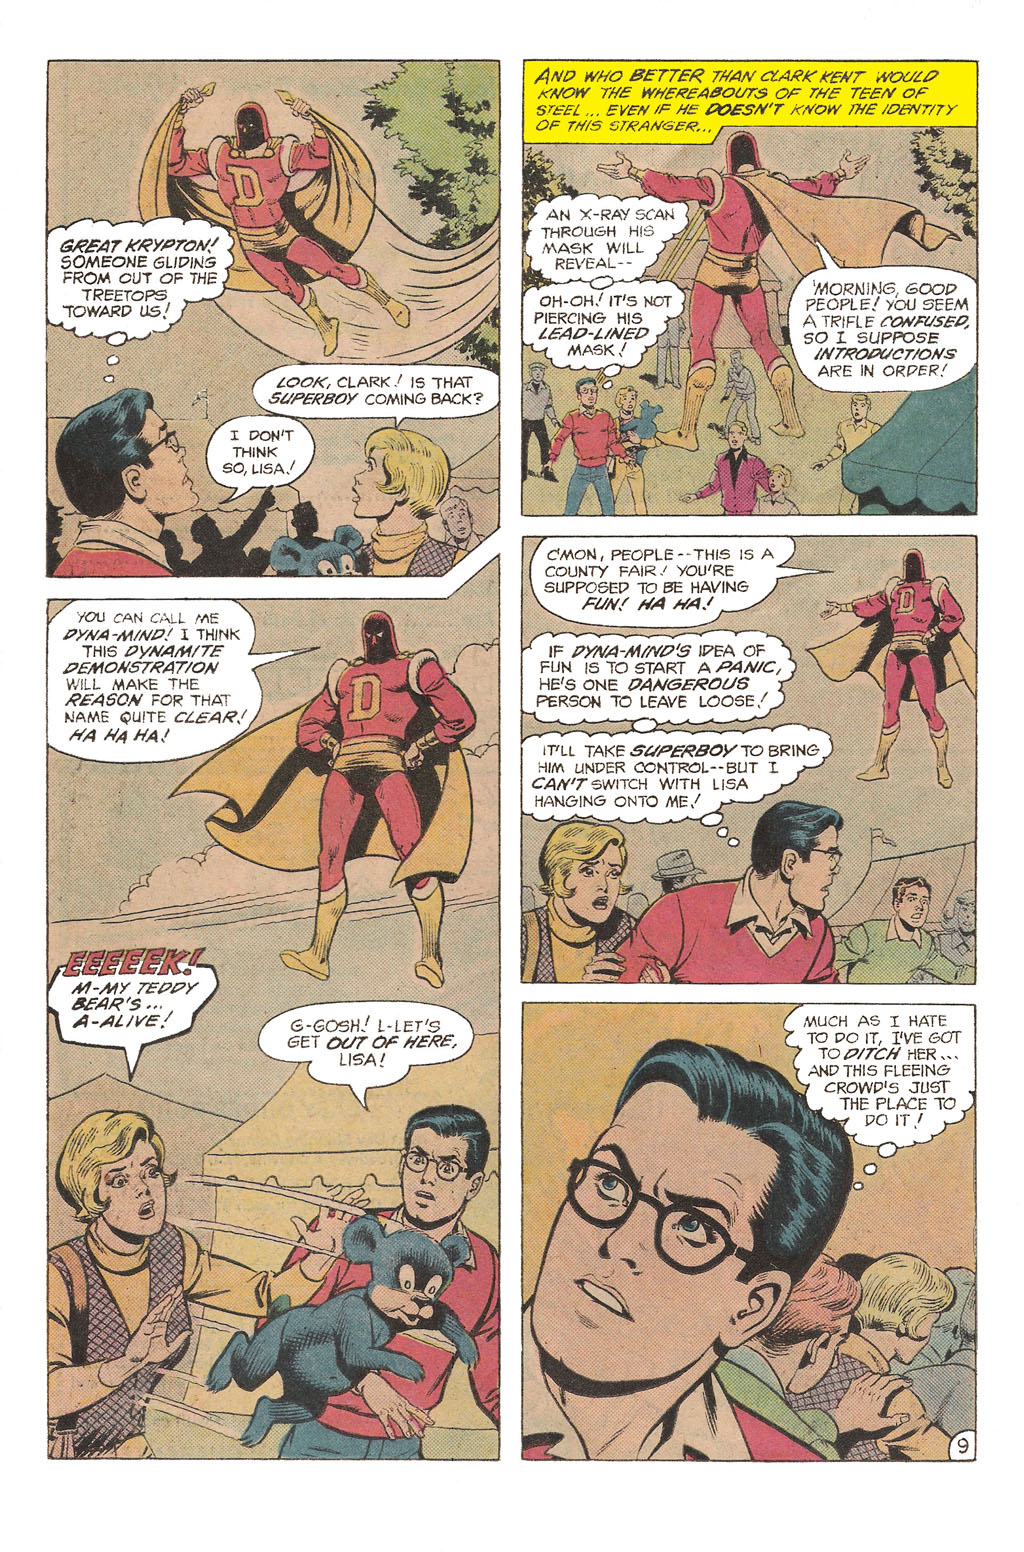 The New Adventures of Superboy 42 Page 9